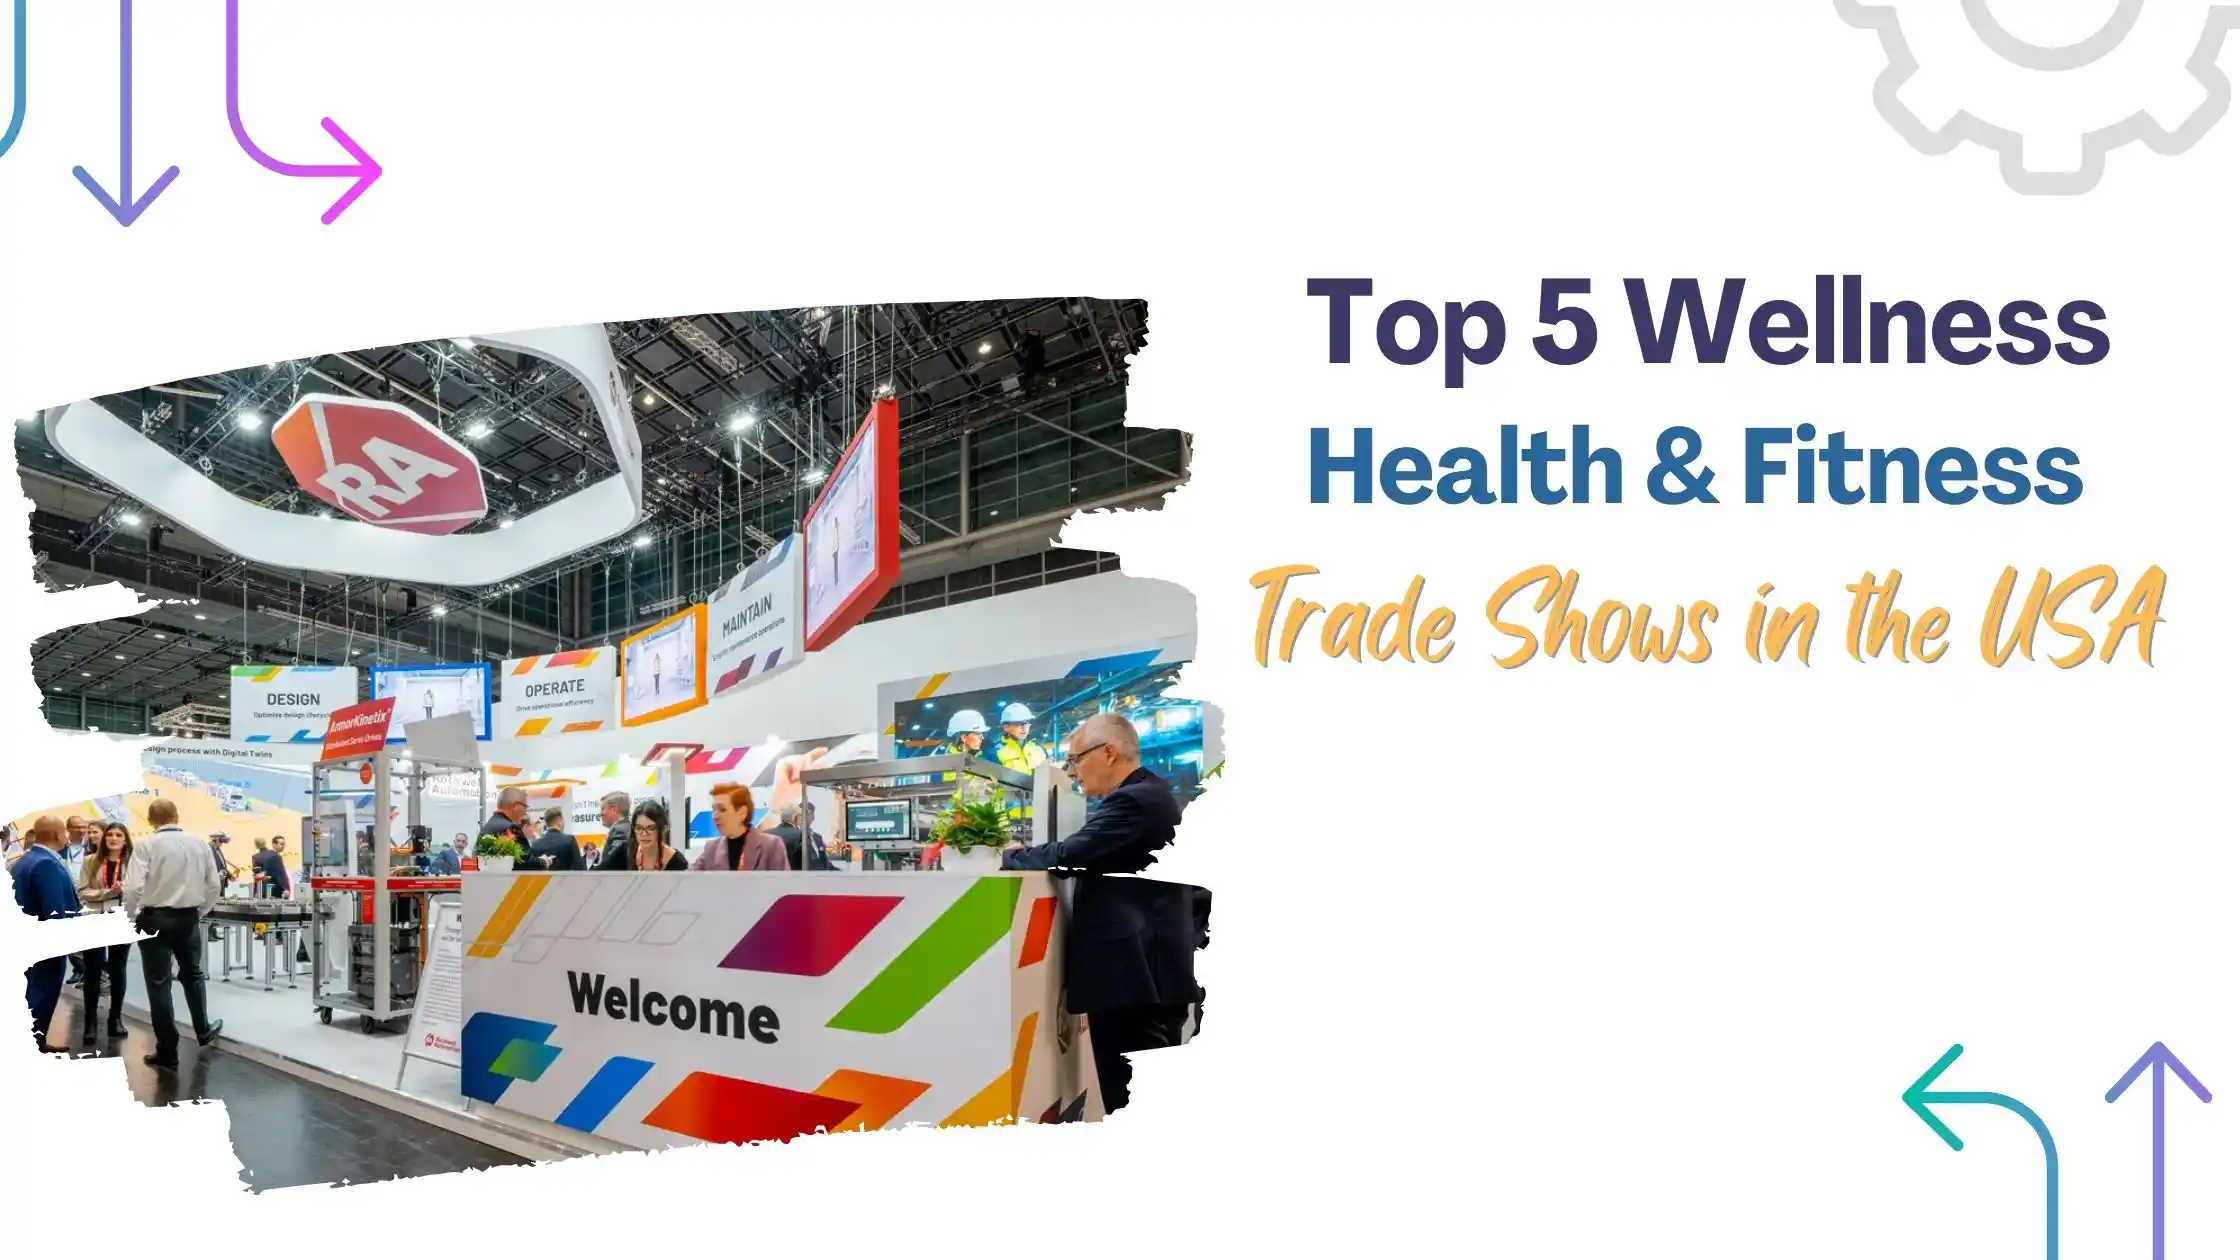 Top 5 Wellness, Health & Fitness Trade Shows in the USA